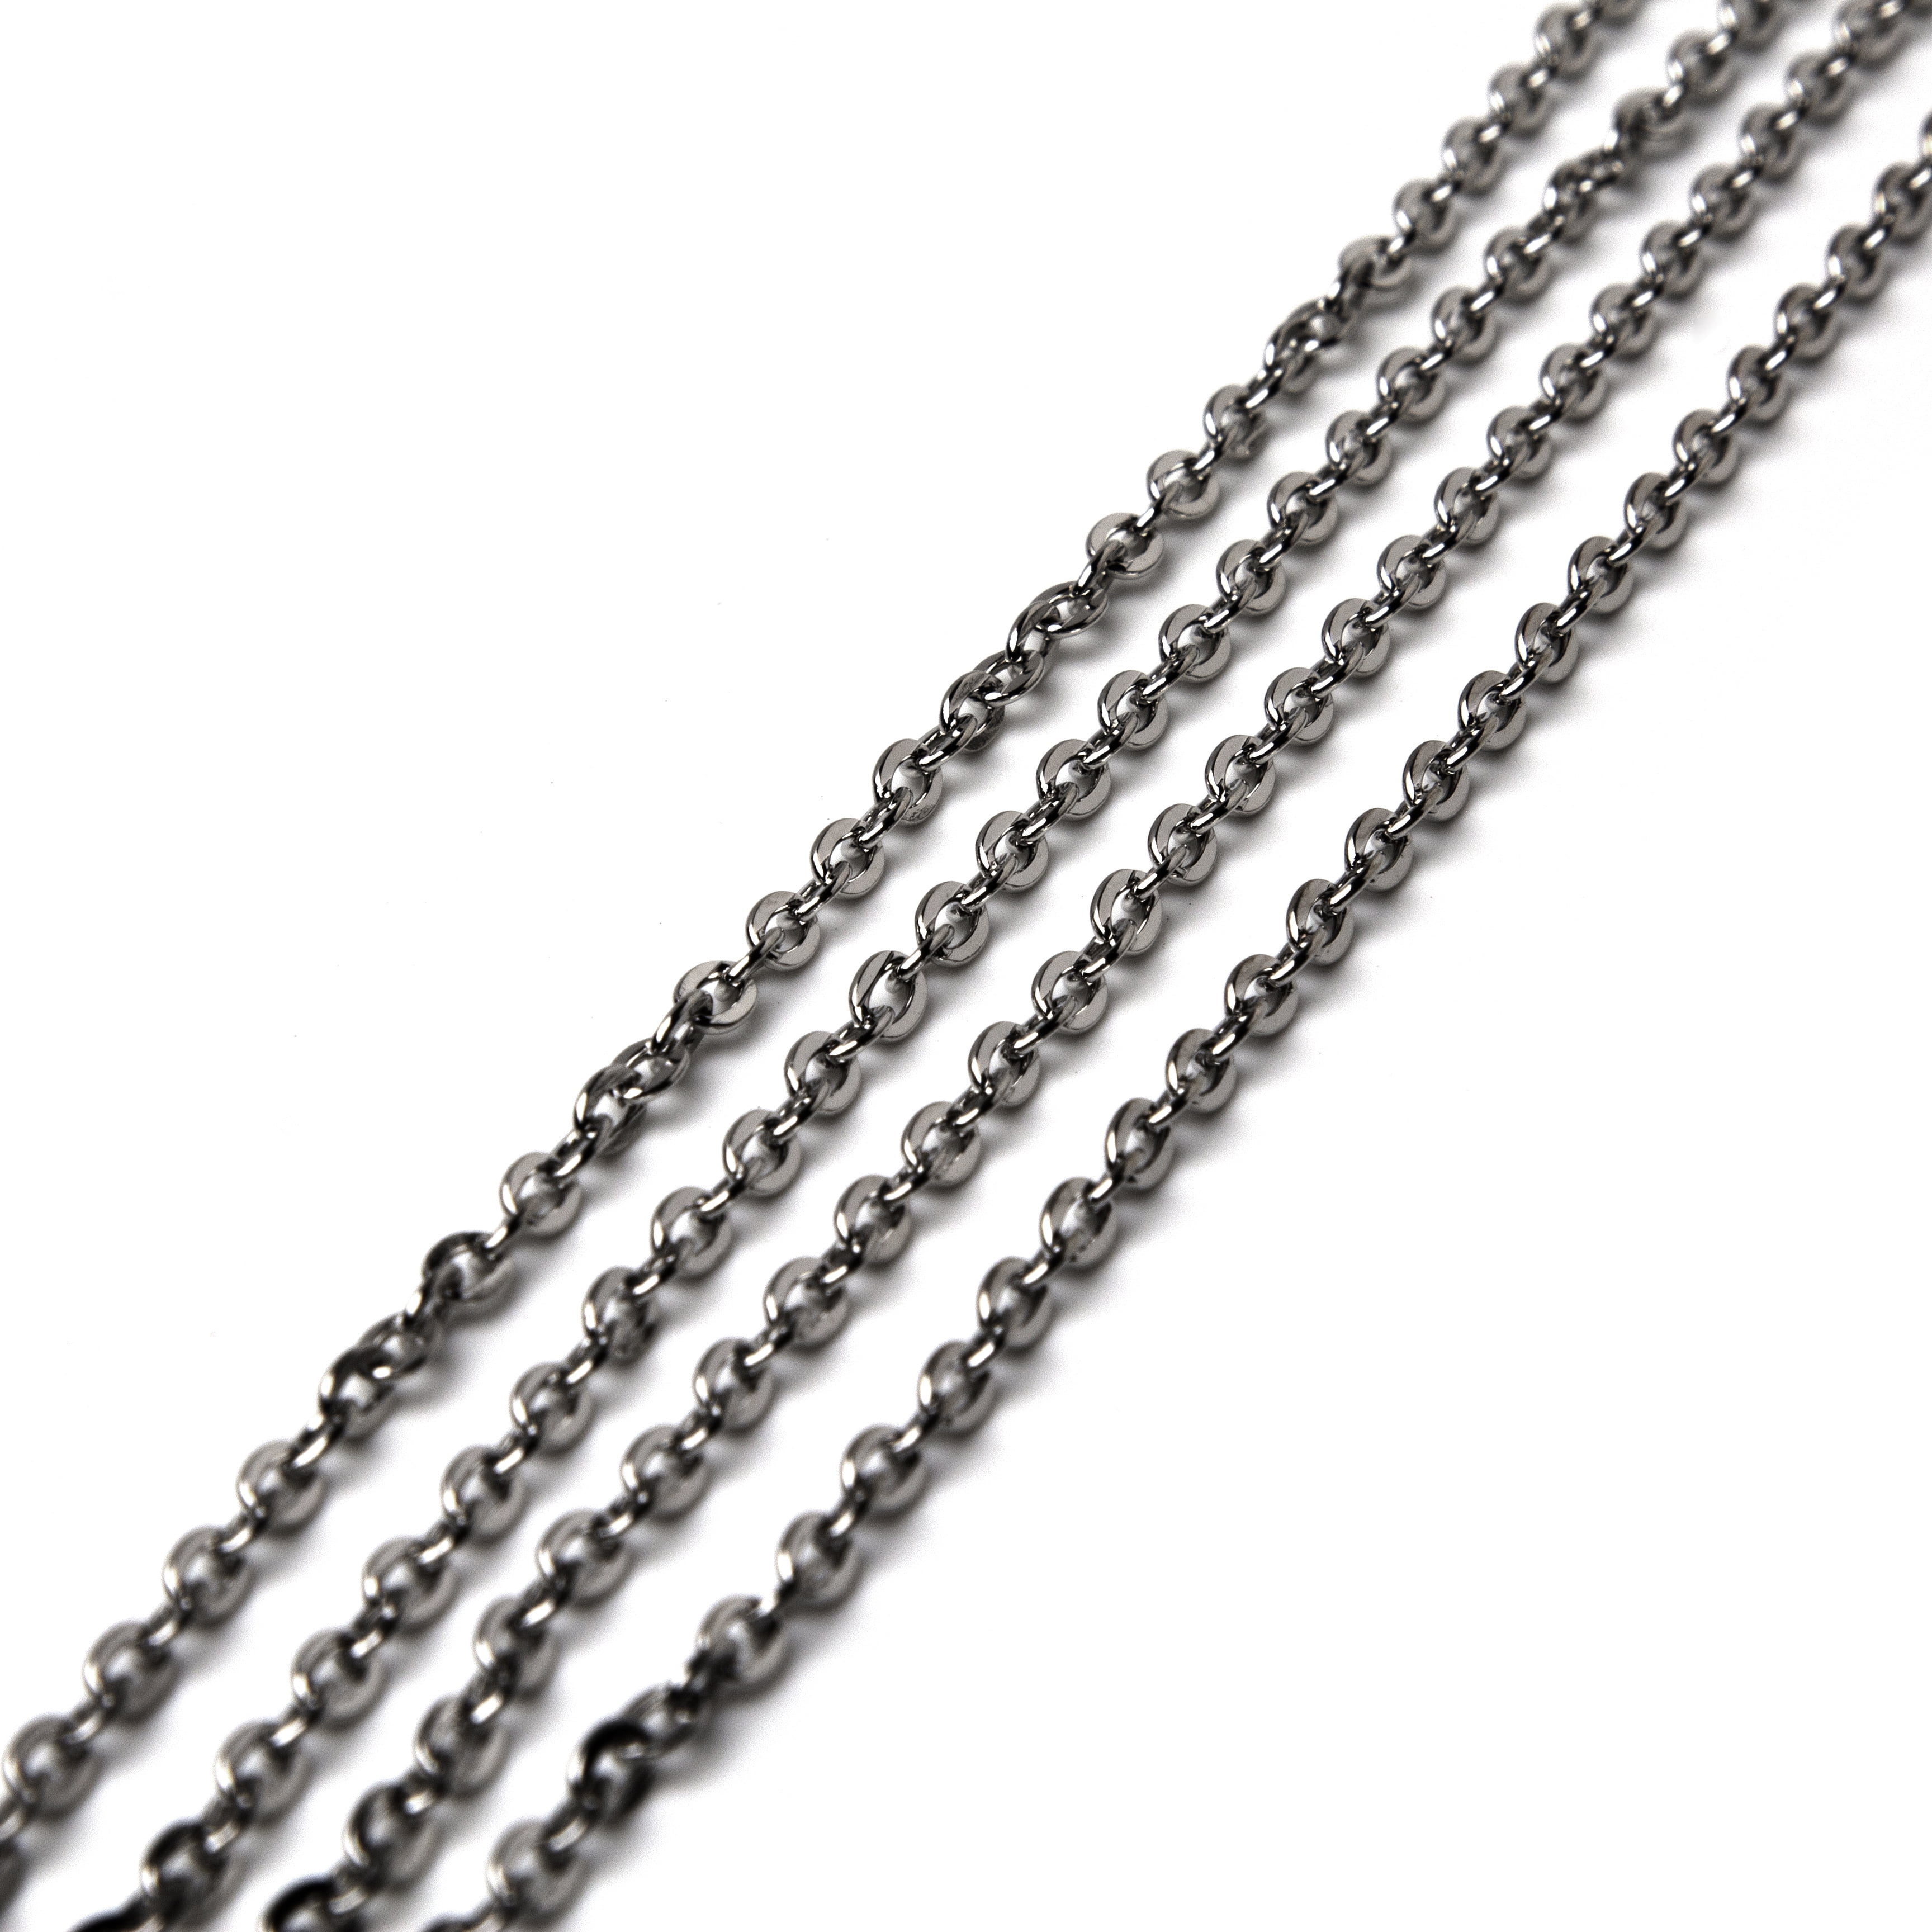 DIY Black and Gray 90in Small Oval Link Chain, Gunmetal Finish